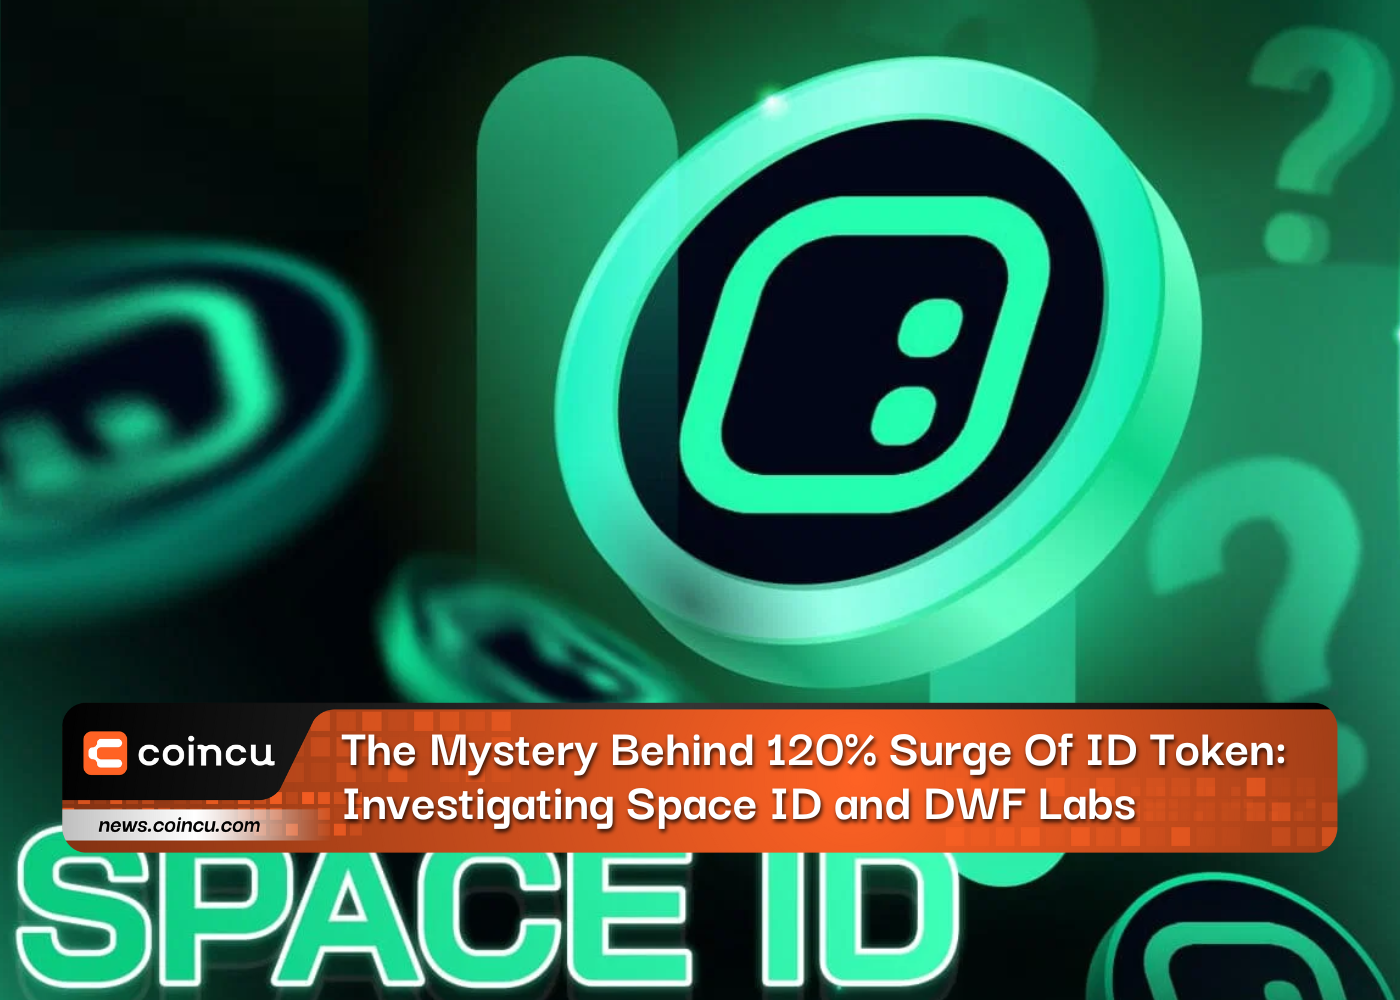 The Mystery Behind 120% Surge Of ID Token: Investigating Space ID and DWF Labs